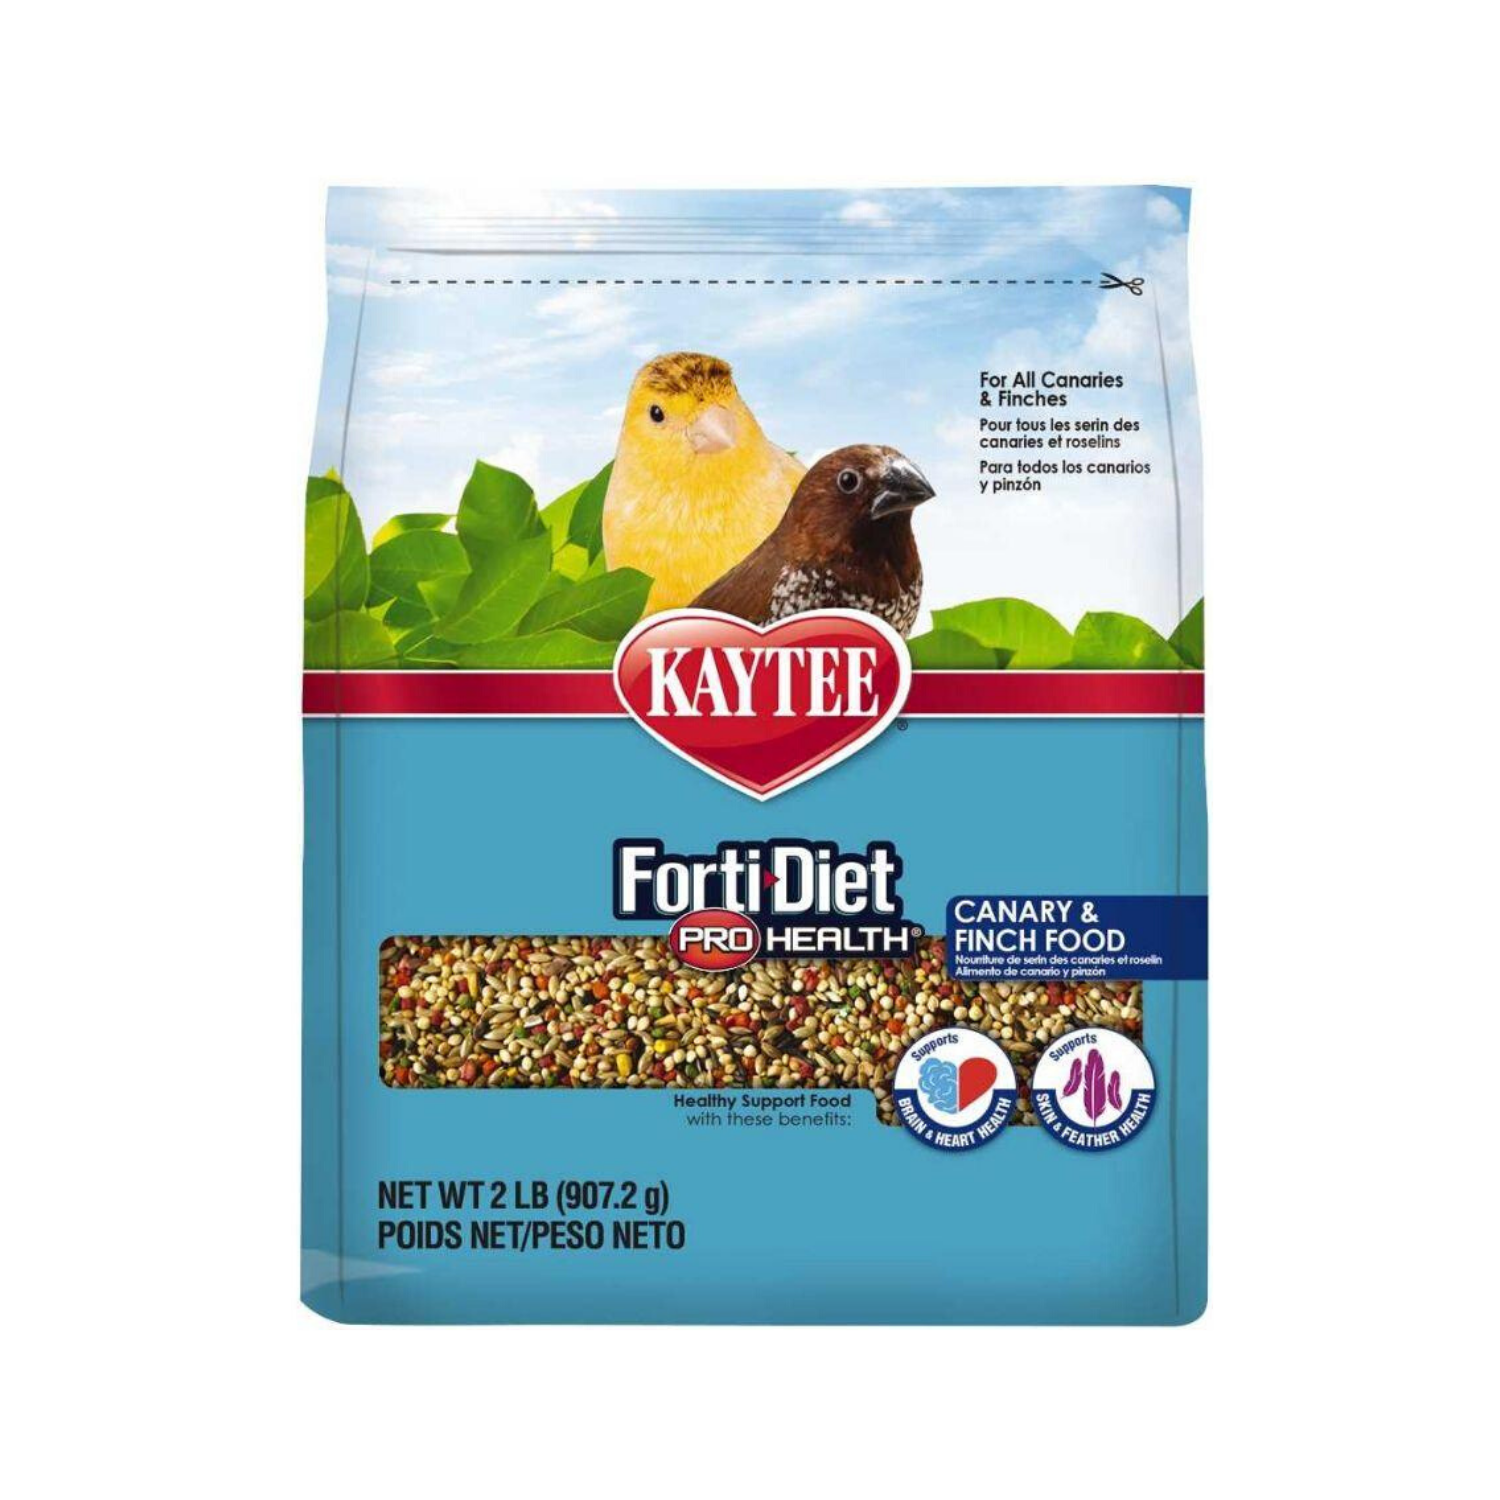 [DISCONTINUED] Kaytee Forti-Diet Pro Health Canary & Finch Food - 907g